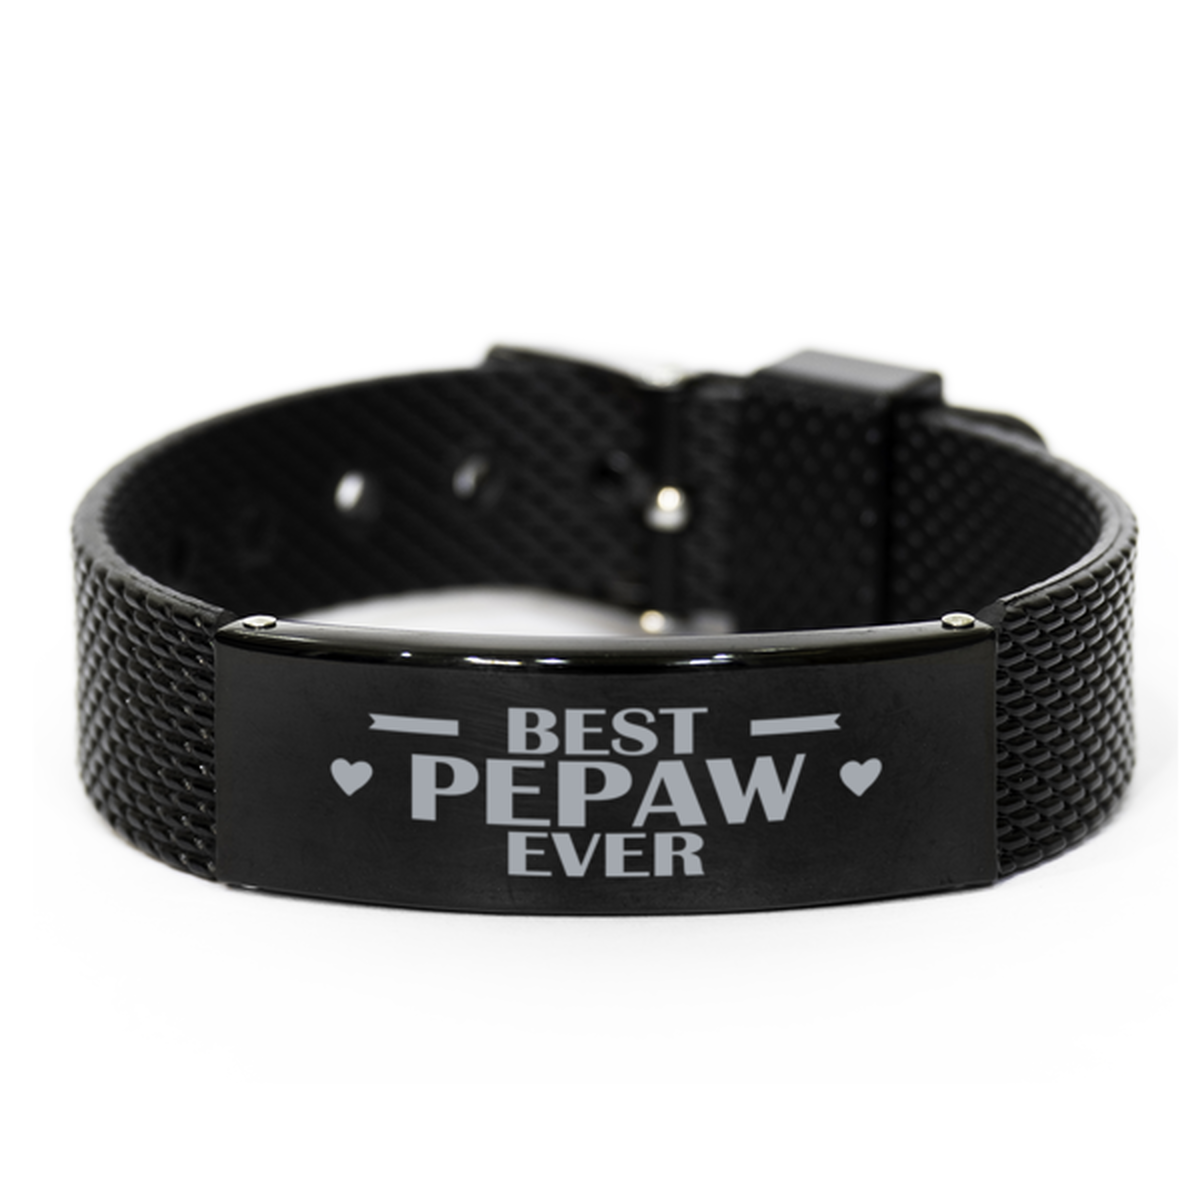 Best Pepaw Ever Pepaw Gifts, Gag Engraved Bracelet For Pepaw, Best Family Gifts For Men